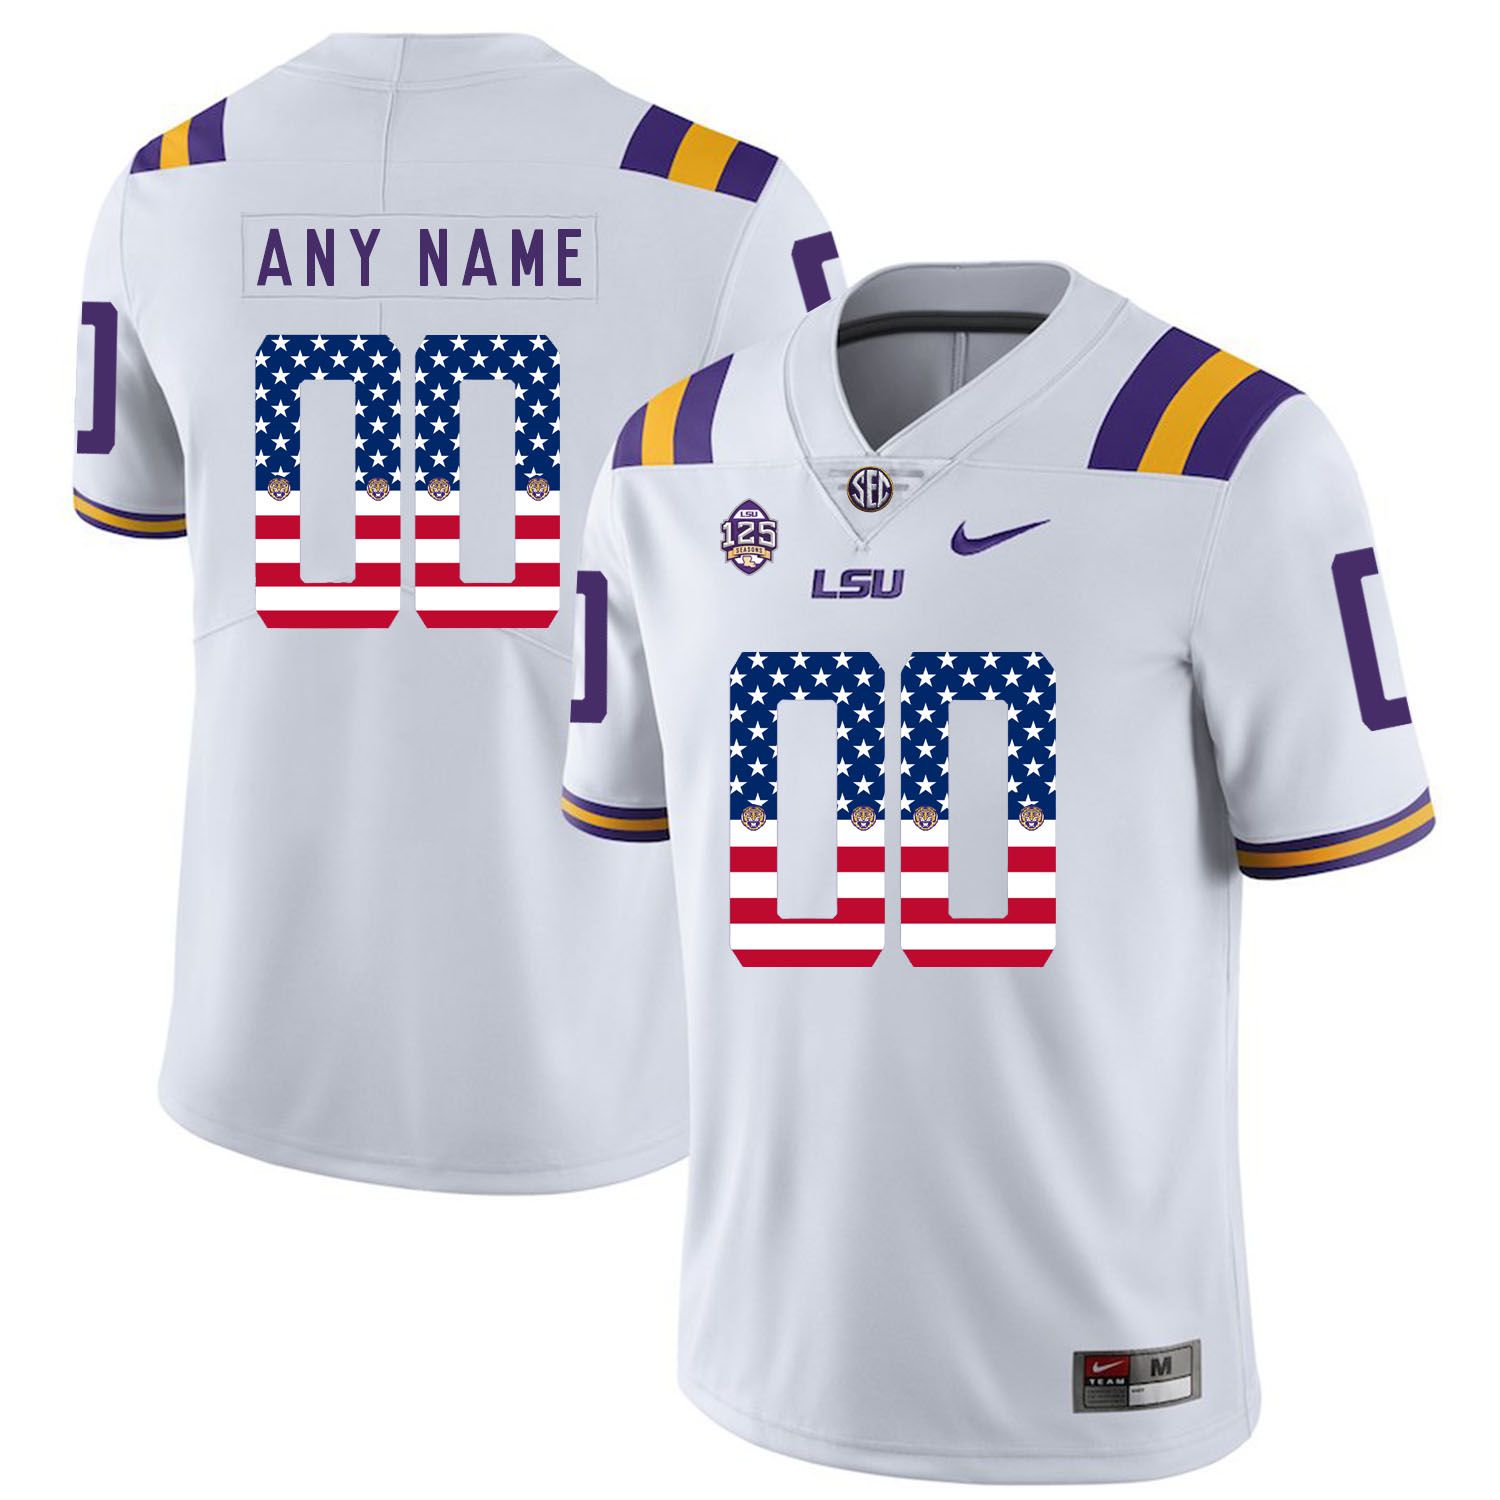 Men LSU Tigers 00 Any name White Flag Customized NCAA Jerseys